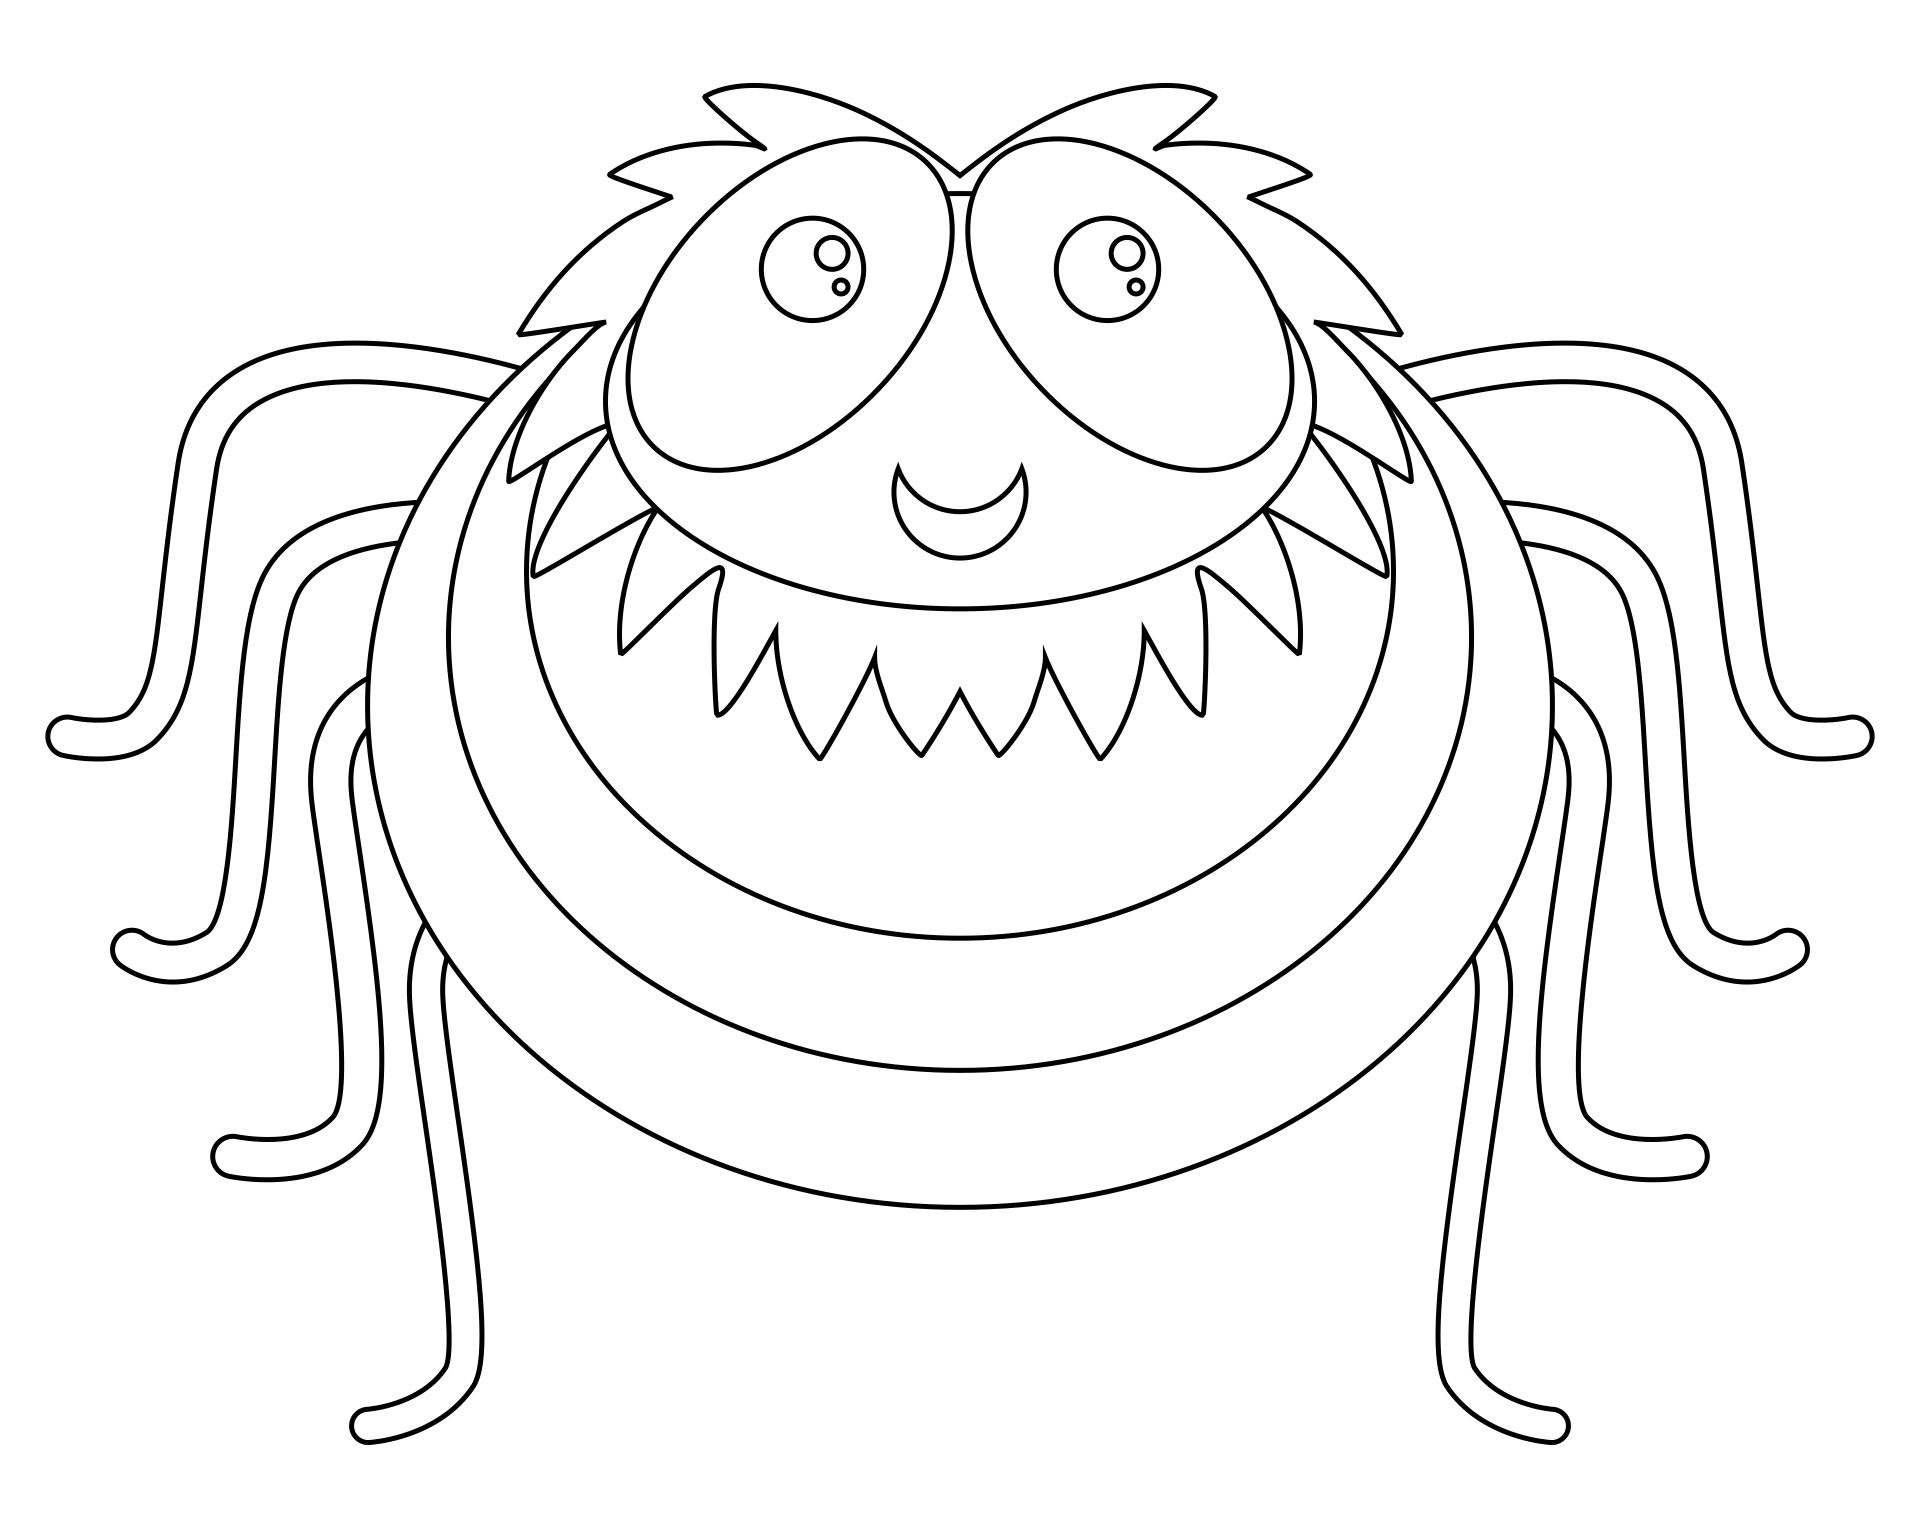 Cute Spider Coloring Page Coloring Pages